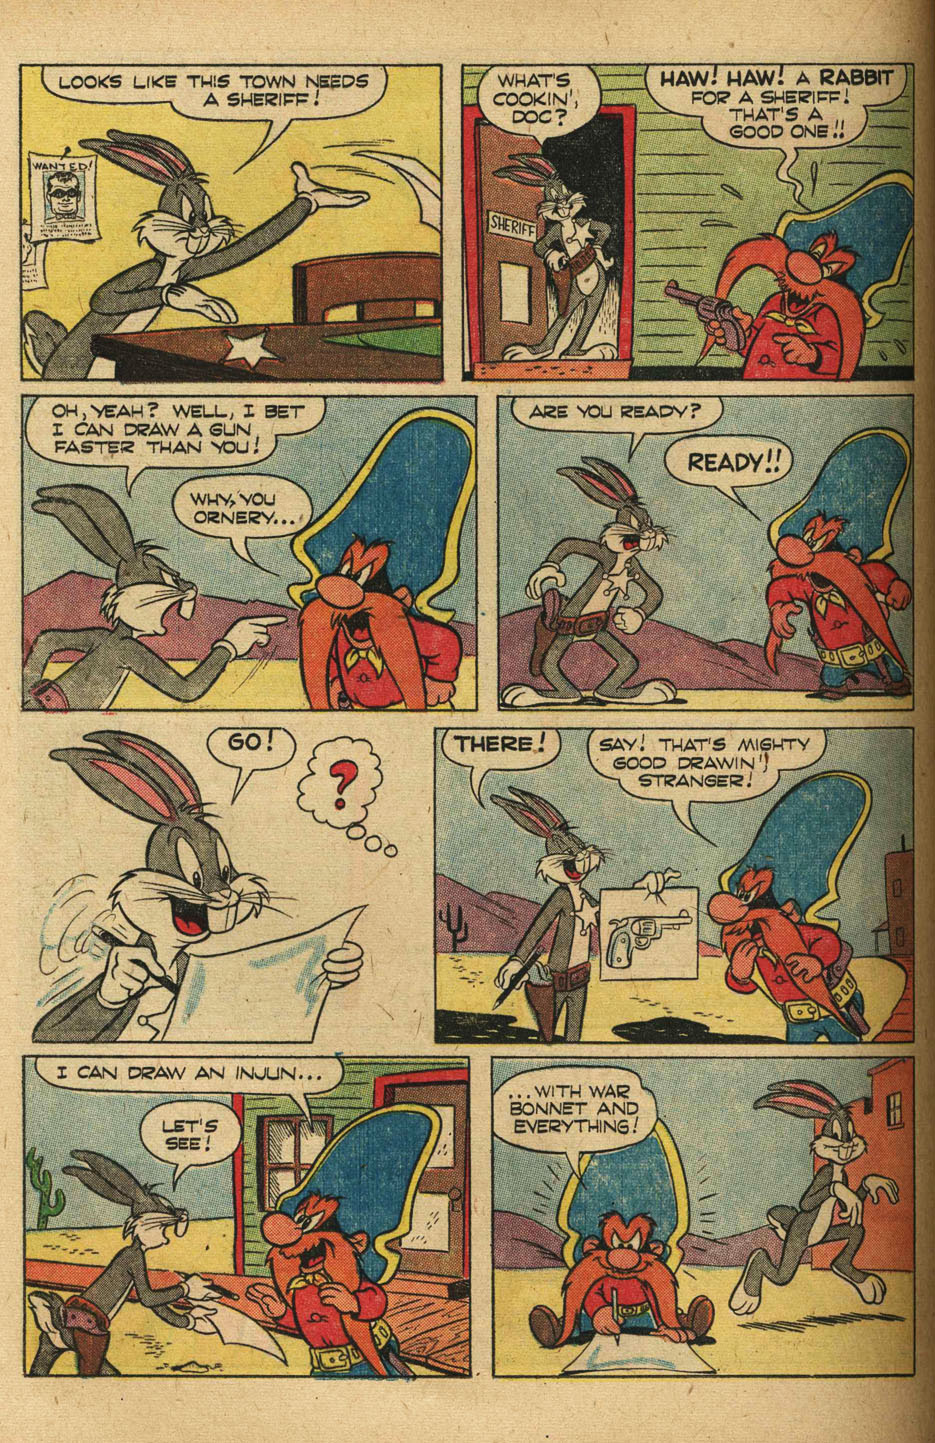 Read online Bugs Bunny comic -  Issue #40 - 16